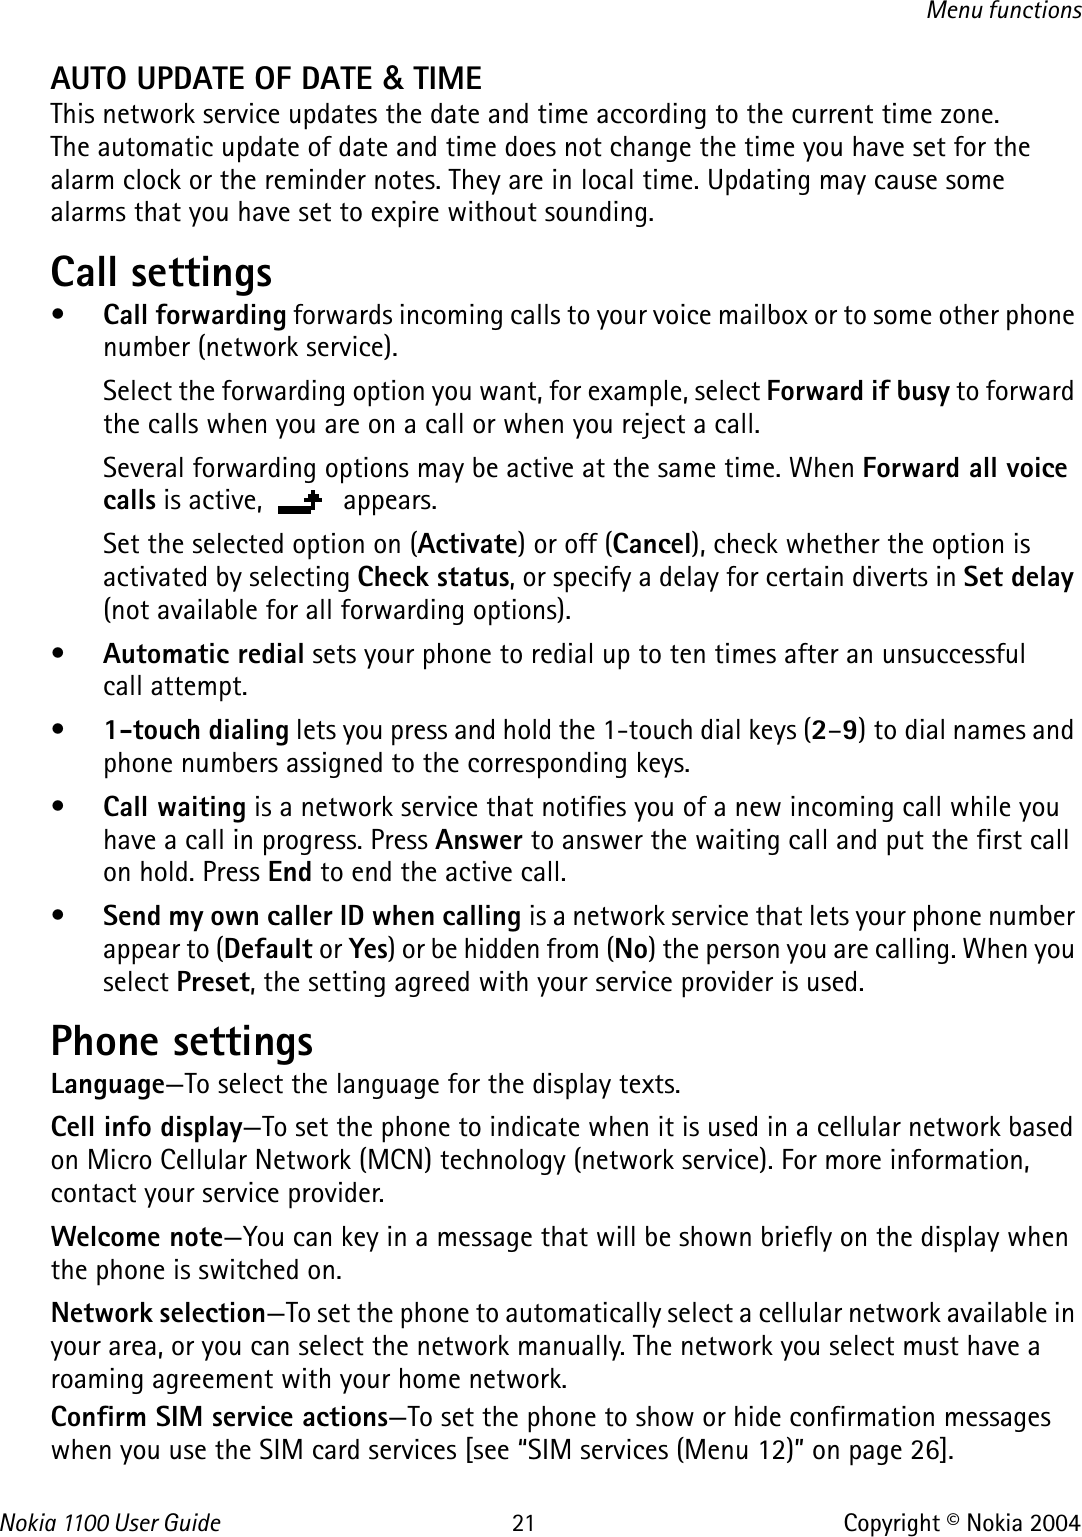 Nokia 110 0  User Guide 21 Copyright © Nokia 2004Menu functionsAUTO UPDATE OF DATE &amp; TIME This network service updates the date and time according to the current time zone. The automatic update of date and time does not change the time you have set for the alarm clock or the reminder notes. They are in local time. Updating may cause some alarms that you have set to expire without sounding.Call settings •Call forwarding forwards incoming calls to your voice mailbox or to some other phone number (network service).Select the forwarding option you want, for example, select Forward if busy to forward the calls when you are on a call or when you reject a call. Several forwarding options may be active at the same time. When Forward all voice calls is active,   appears.Set the selected option on (Activate) or off (Cancel), check whether the option is activated by selecting Check status, or specify a delay for certain diverts in Set delay (not available for all forwarding options).•Automatic redial sets your phone to redial up to ten times after an unsuccessful call attempt.•1-touch dialing lets you press and hold the 1-touch dial keys (2–9) to dial names and phone numbers assigned to the corresponding keys.•Call waiting is a network service that notifies you of a new incoming call while you have a call in progress. Press Answer to answer the waiting call and put the first call on hold. Press End to end the active call.•Send my own caller ID when calling is a network service that lets your phone number appear to (Default or Yes) or be hidden from (No) the person you are calling. When you select Preset, the setting agreed with your service provider is used.Phone settings Language—To select the language for the display texts.Cell info display—To set the phone to indicate when it is used in a cellular network based on Micro Cellular Network (MCN) technology (network service). For more information, contact your service provider.Welcome note—You can key in a message that will be shown briefly on the display when the phone is switched on.Network selection—To set the phone to automatically select a cellular network available in your area, or you can select the network manually. The network you select must have a roaming agreement with your home network.Confirm SIM service actions—To set the phone to show or hide confirmation messages when you use the SIM card services [see “SIM services (Menu 12)” on page 26].